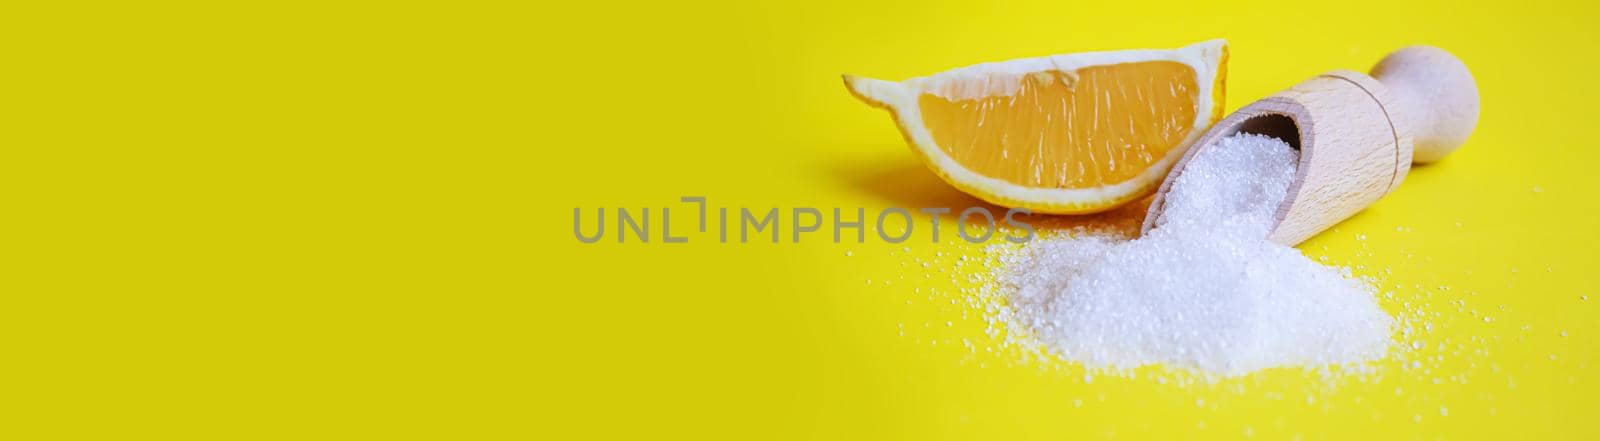 Citric acid on a yellow background. Selective focus. by mila1784